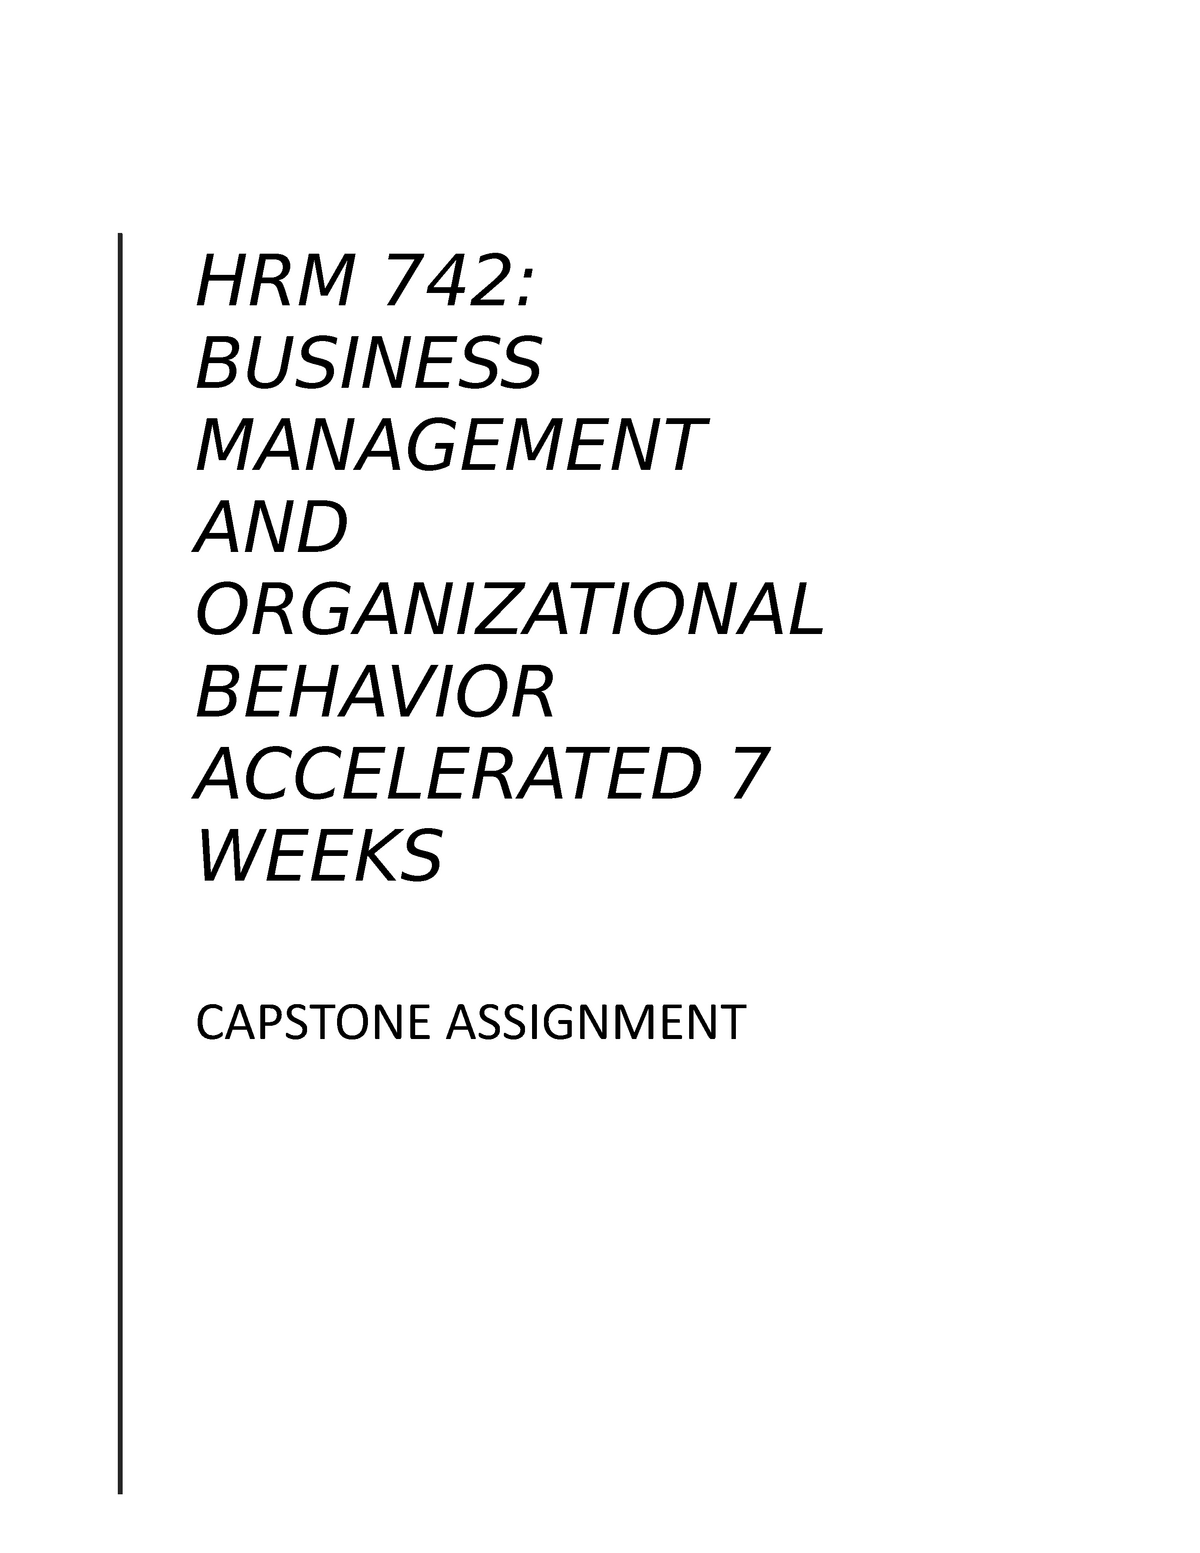 hrm742 individual assignment 3